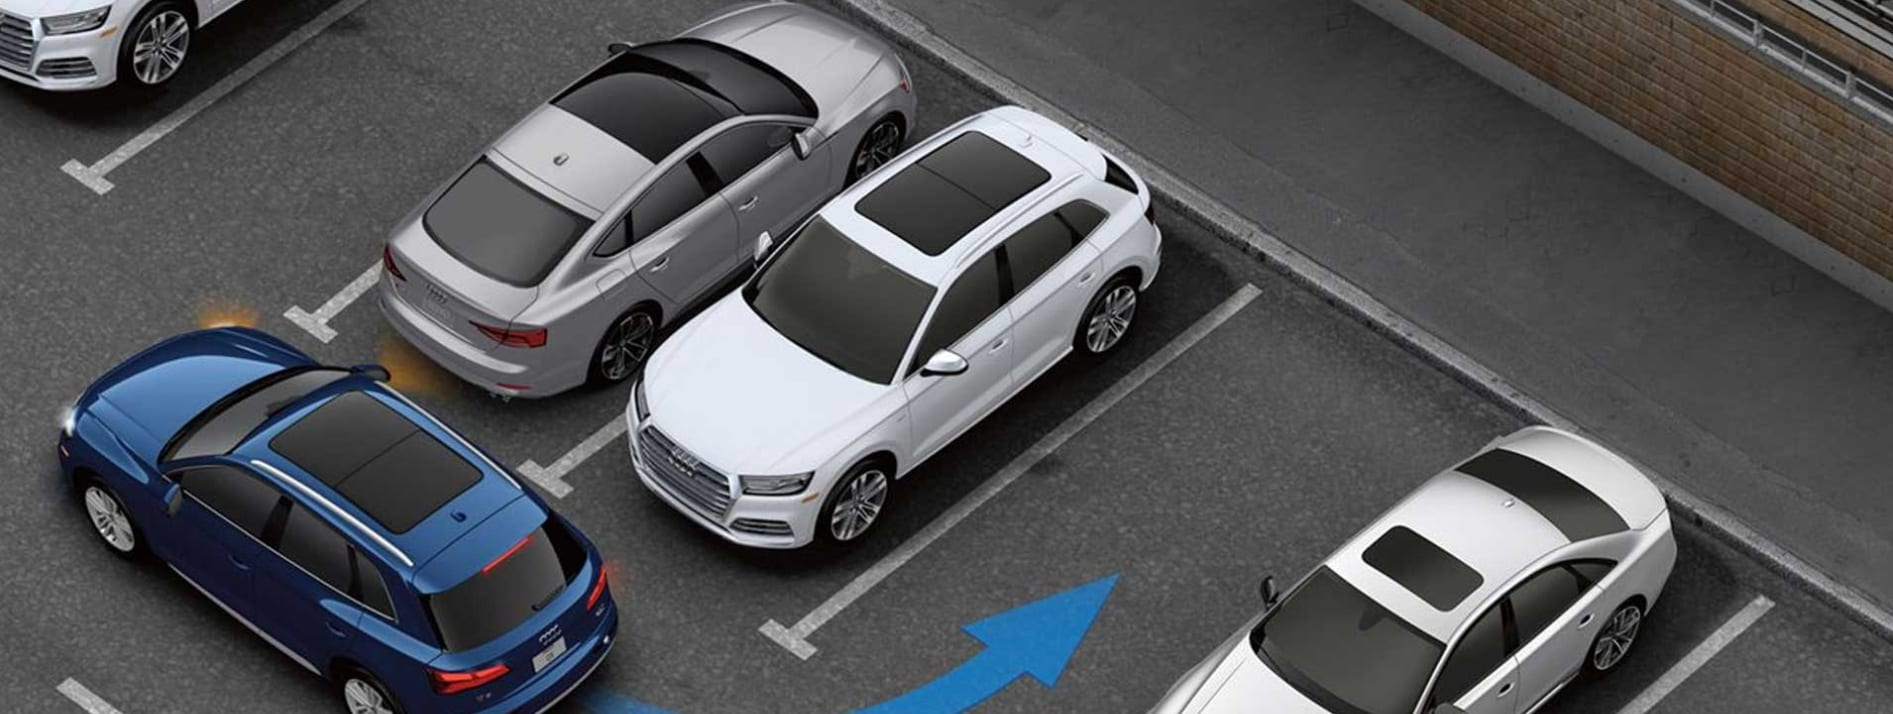 An overhead view of a blue 2023 Audi Q5 that is about to park using park assist